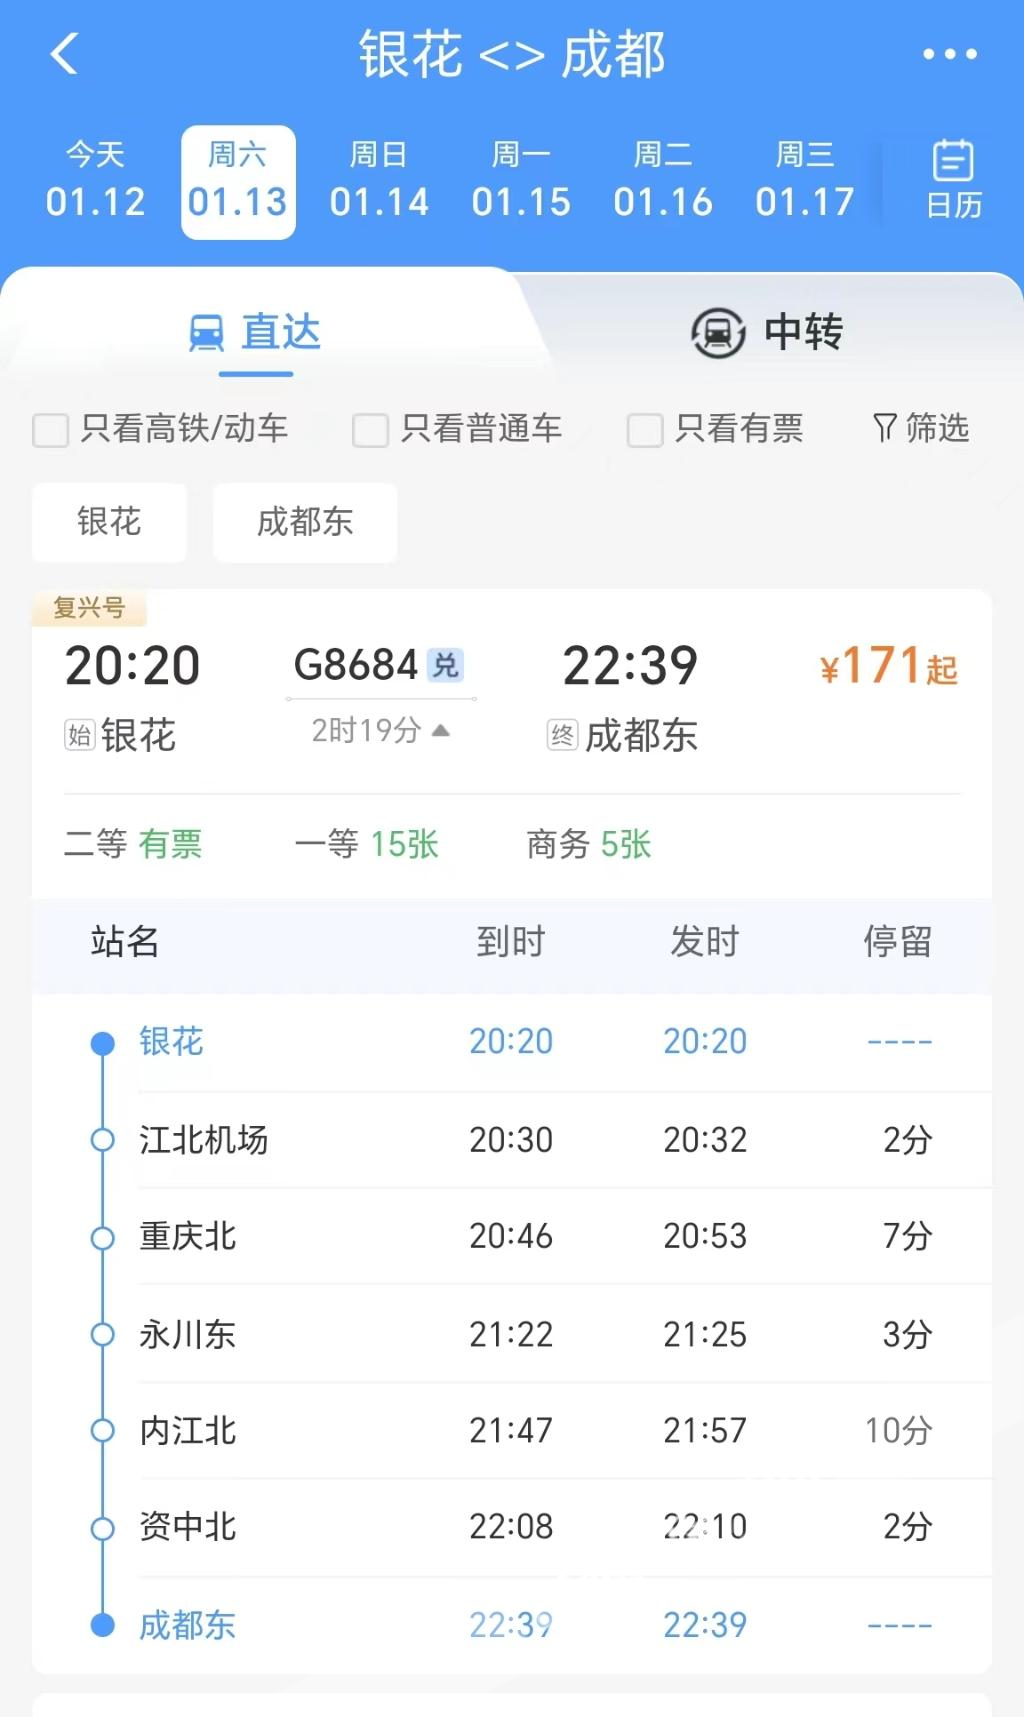 The train runs from Yinhua Railway Station to Chengdudong Railway Station.